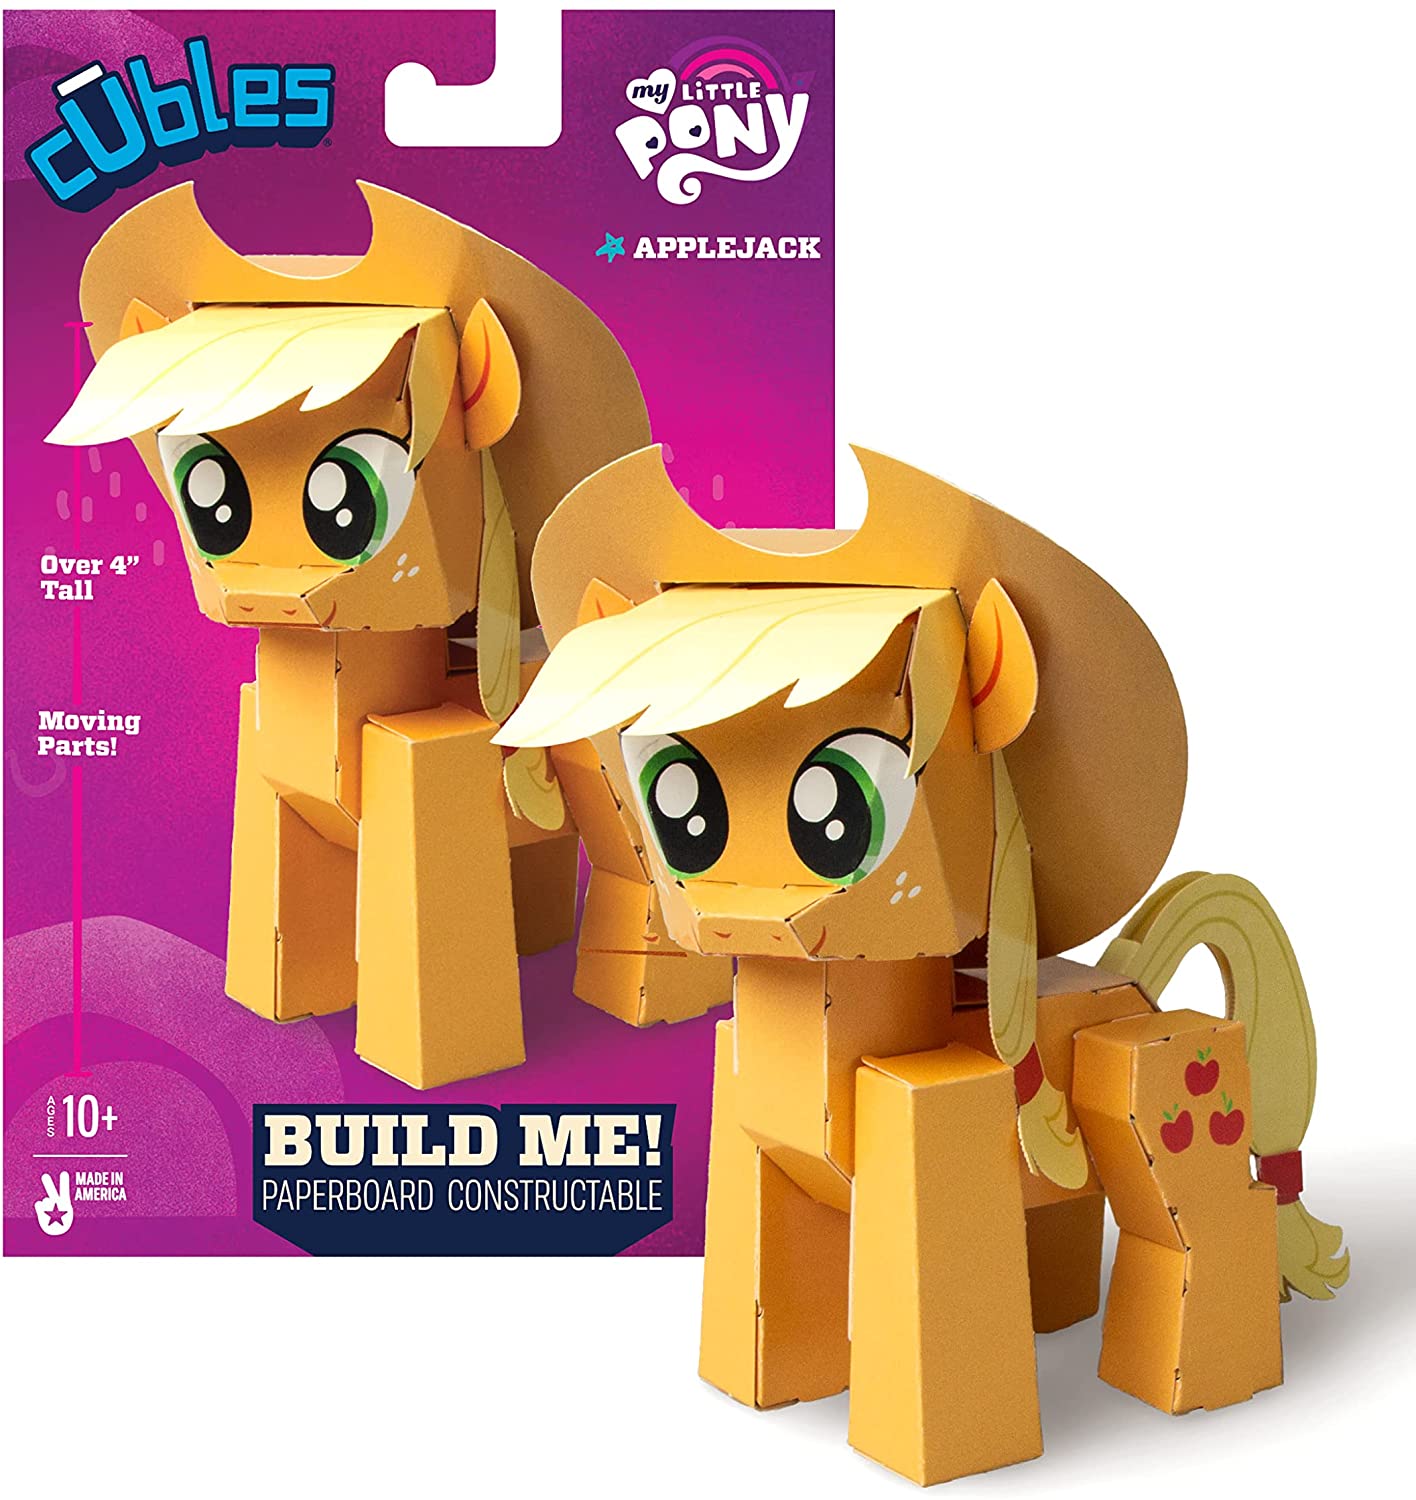 MLP Series 1 Pony Characters Paperboard Constructible 3-Pack Set 2